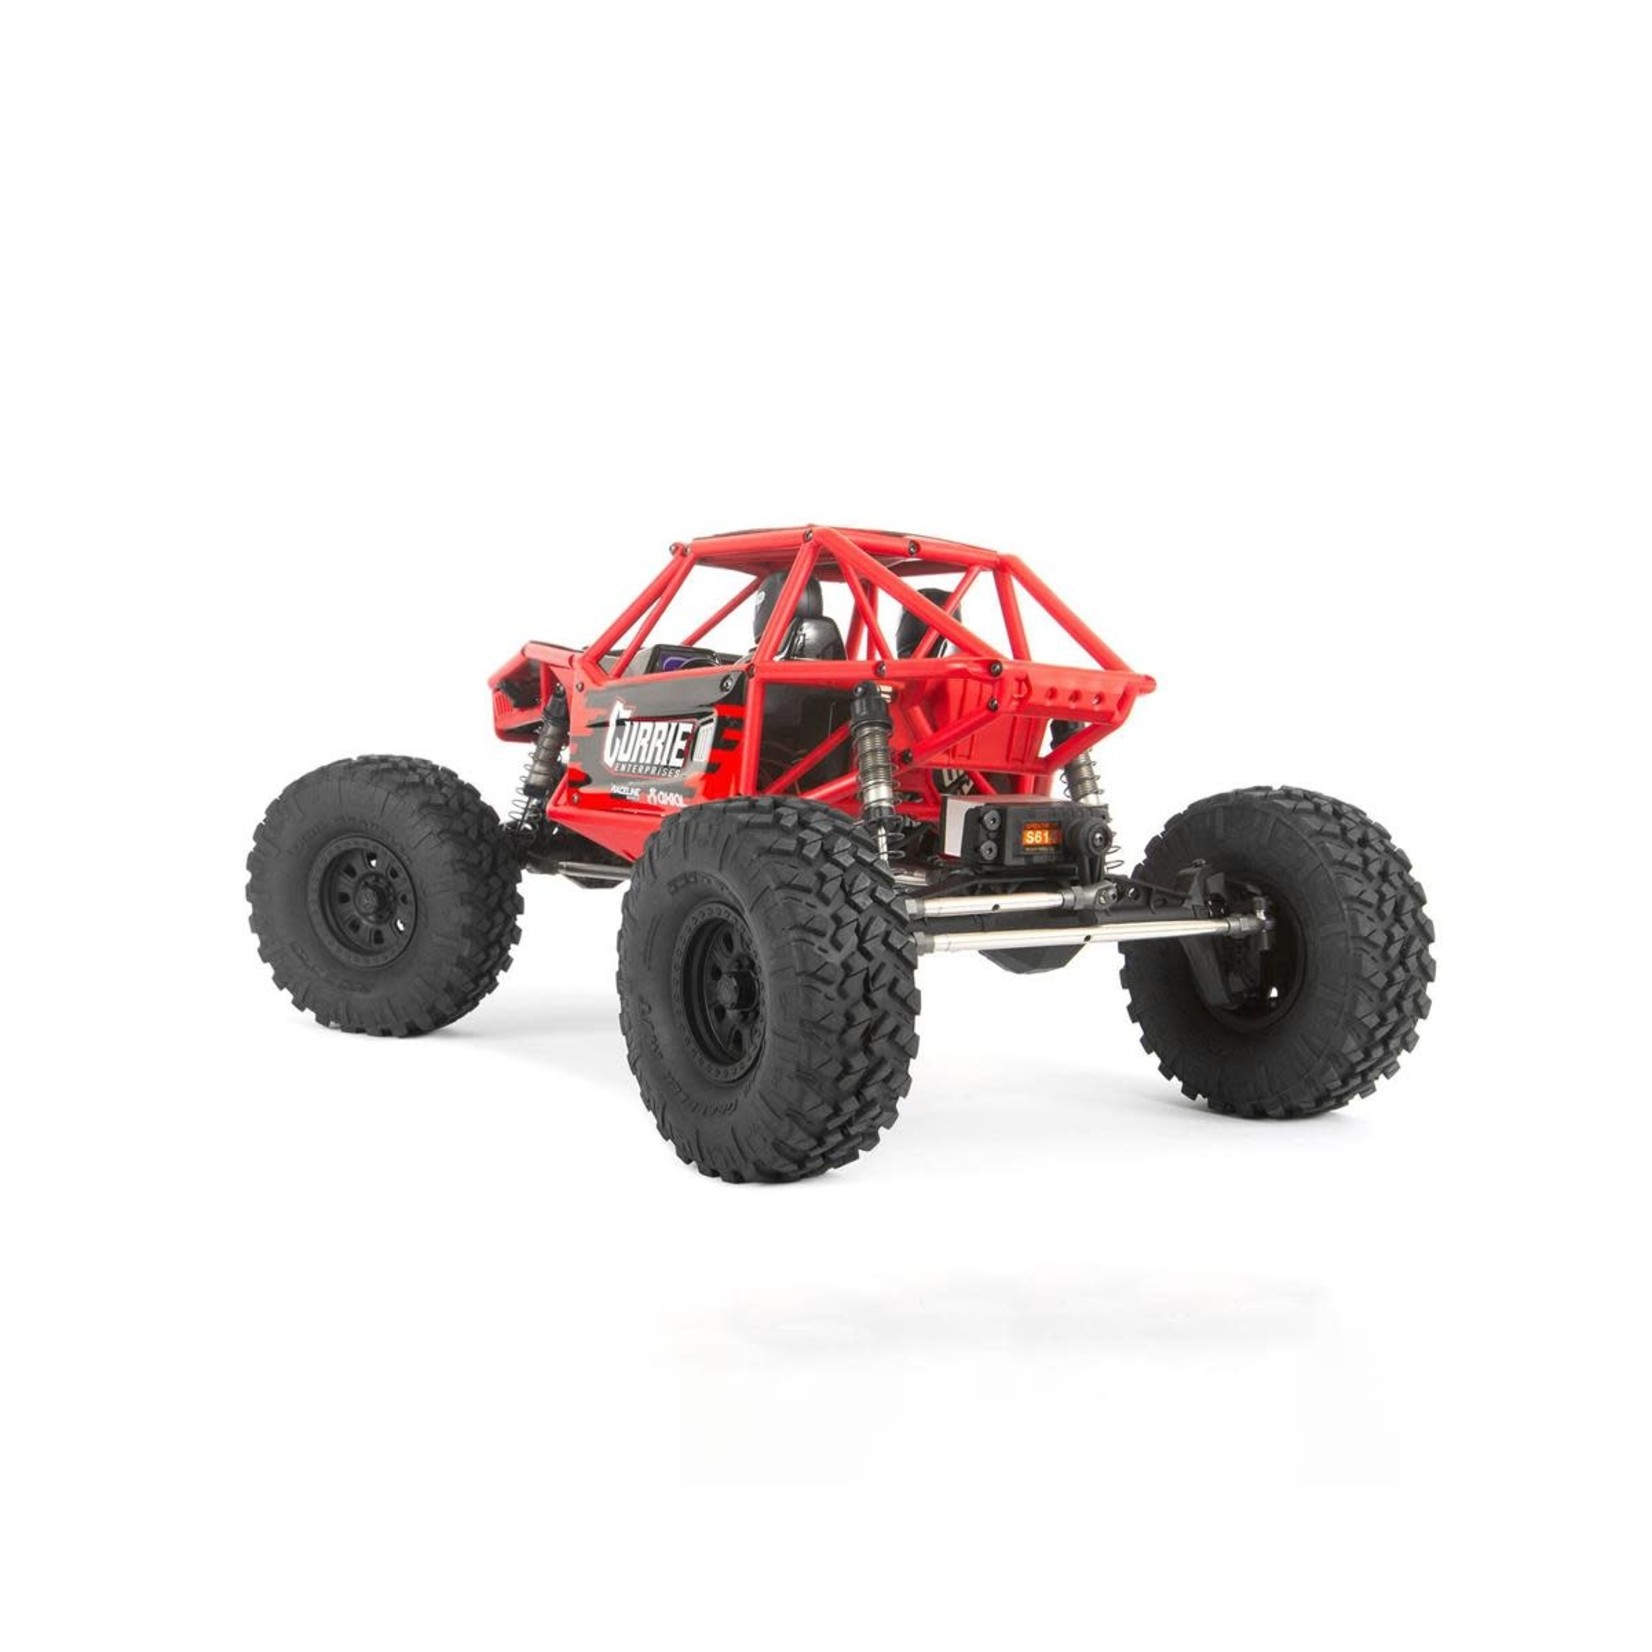 Axial Axial Capra 1.9 4WS Unlimited Trail Buggy 1/10 RTR 4WD Rock Crawler (Red) w/DX3 2.4GHz Radio #AXI03022BT1